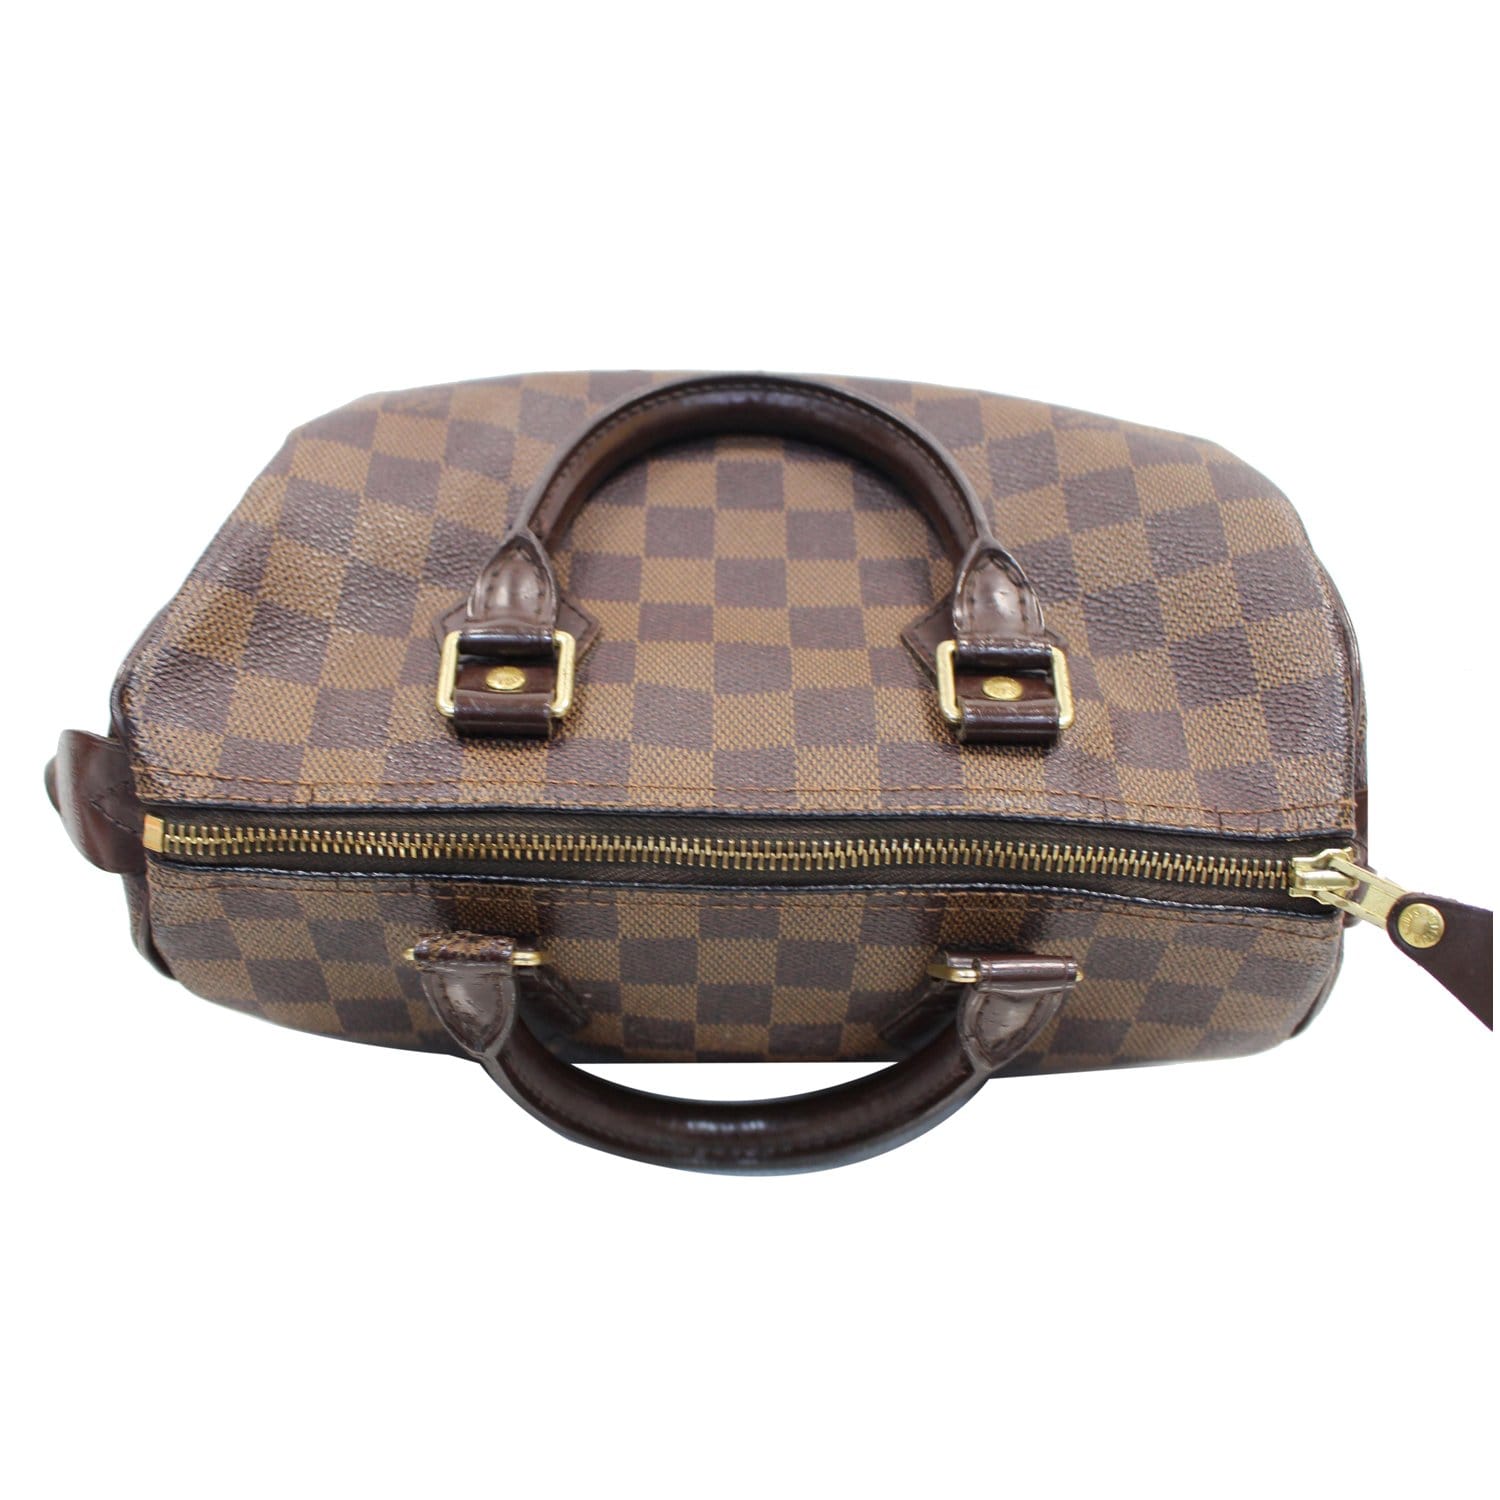 Speedy doctor 25 leather handbag Louis Vuitton Brown in Leather - 33278305